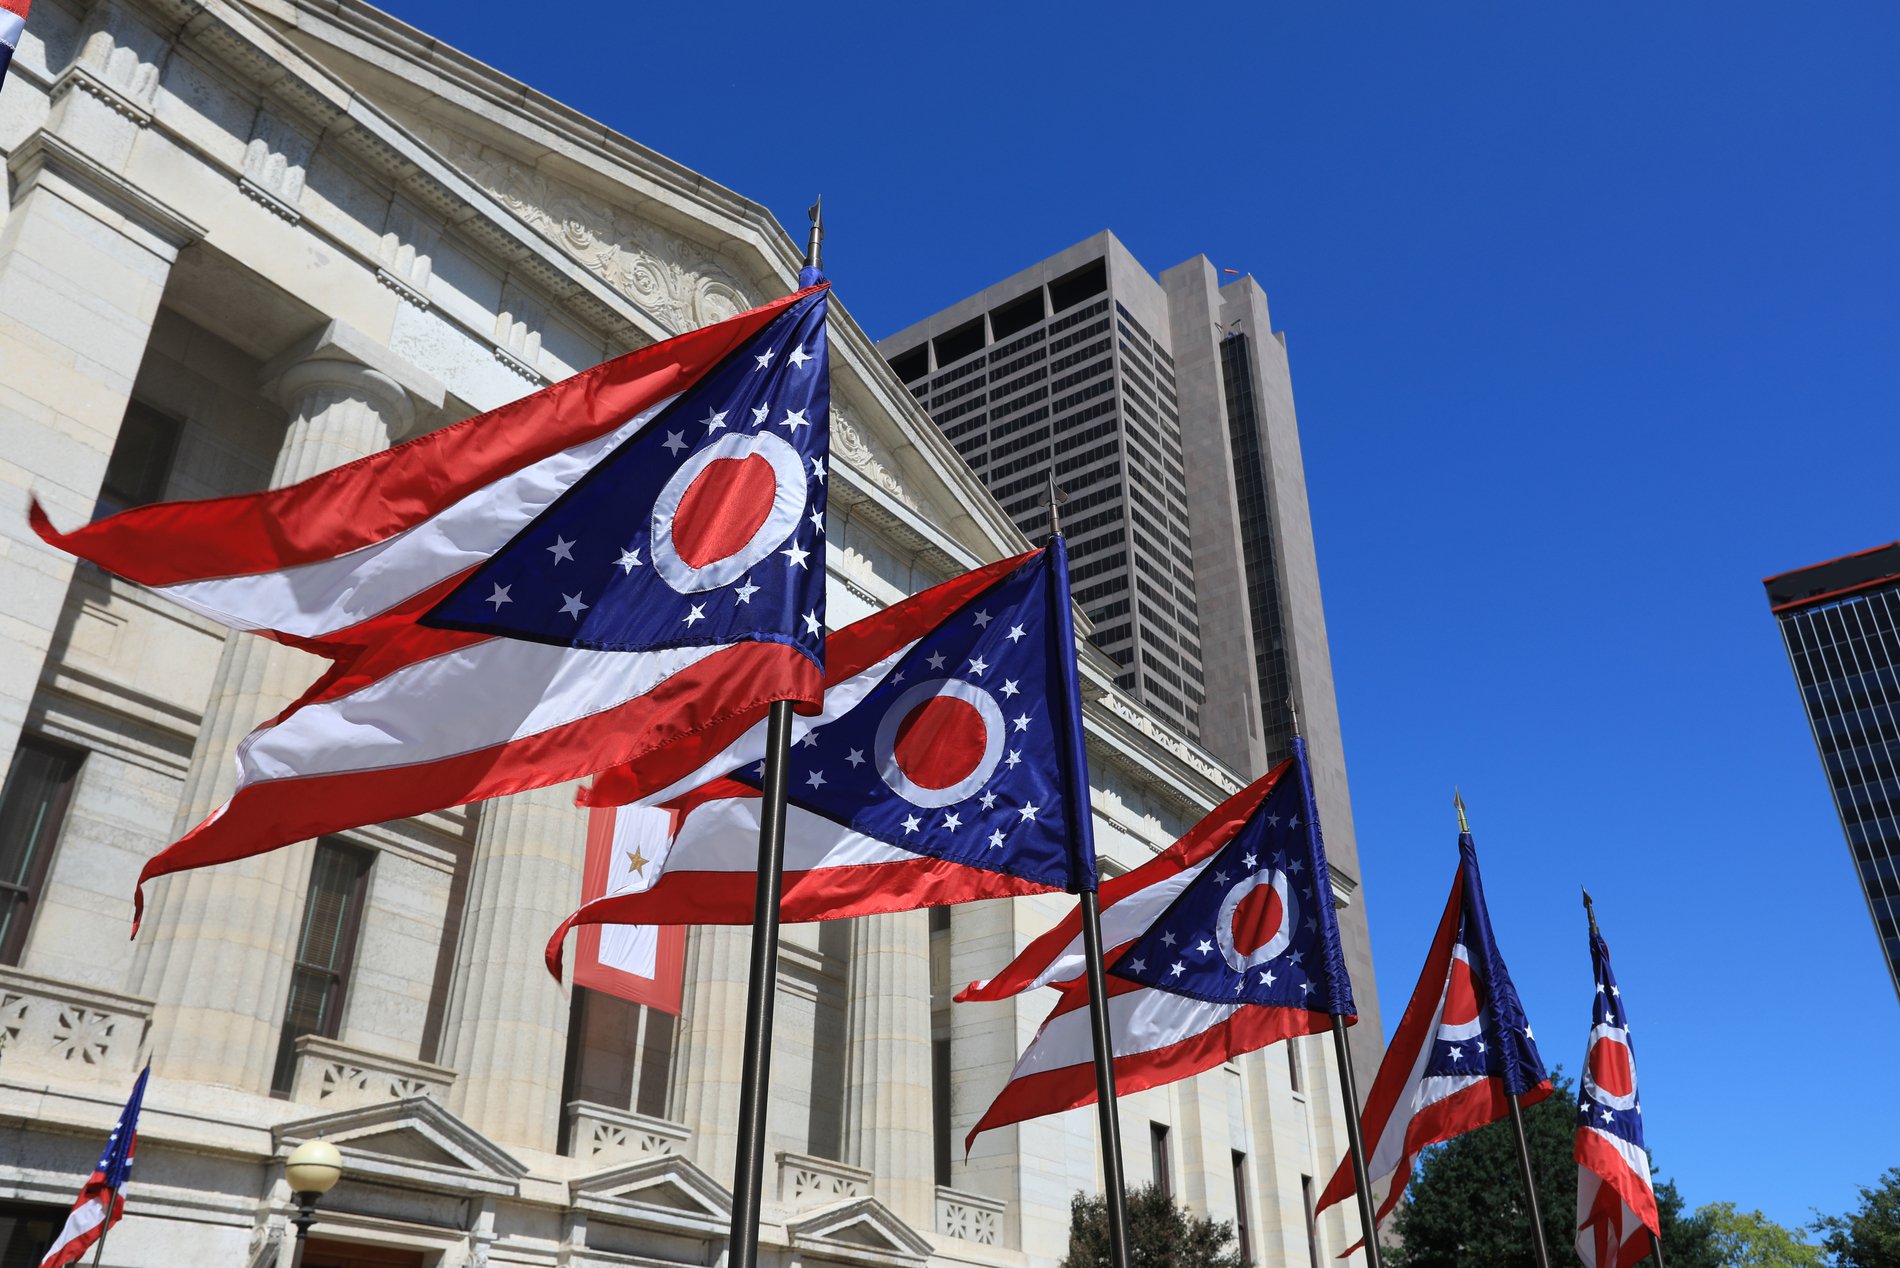 Ohio is one of the first blockchain-friendly states